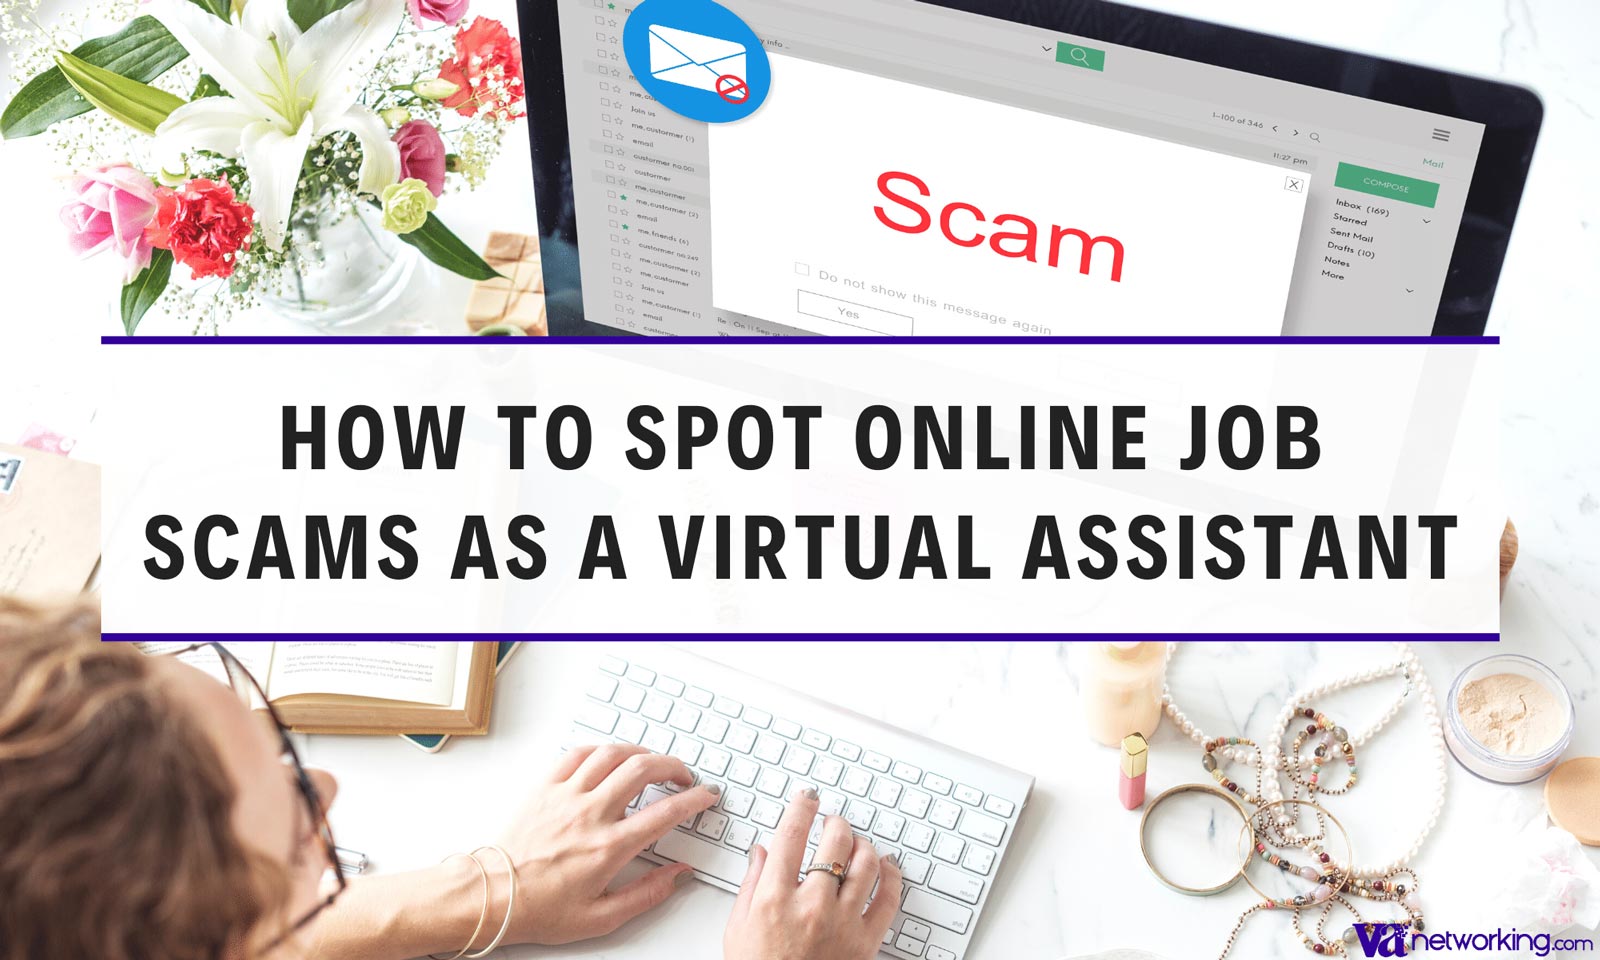 How to Spot Online Job Scams as a Virtual Assistant